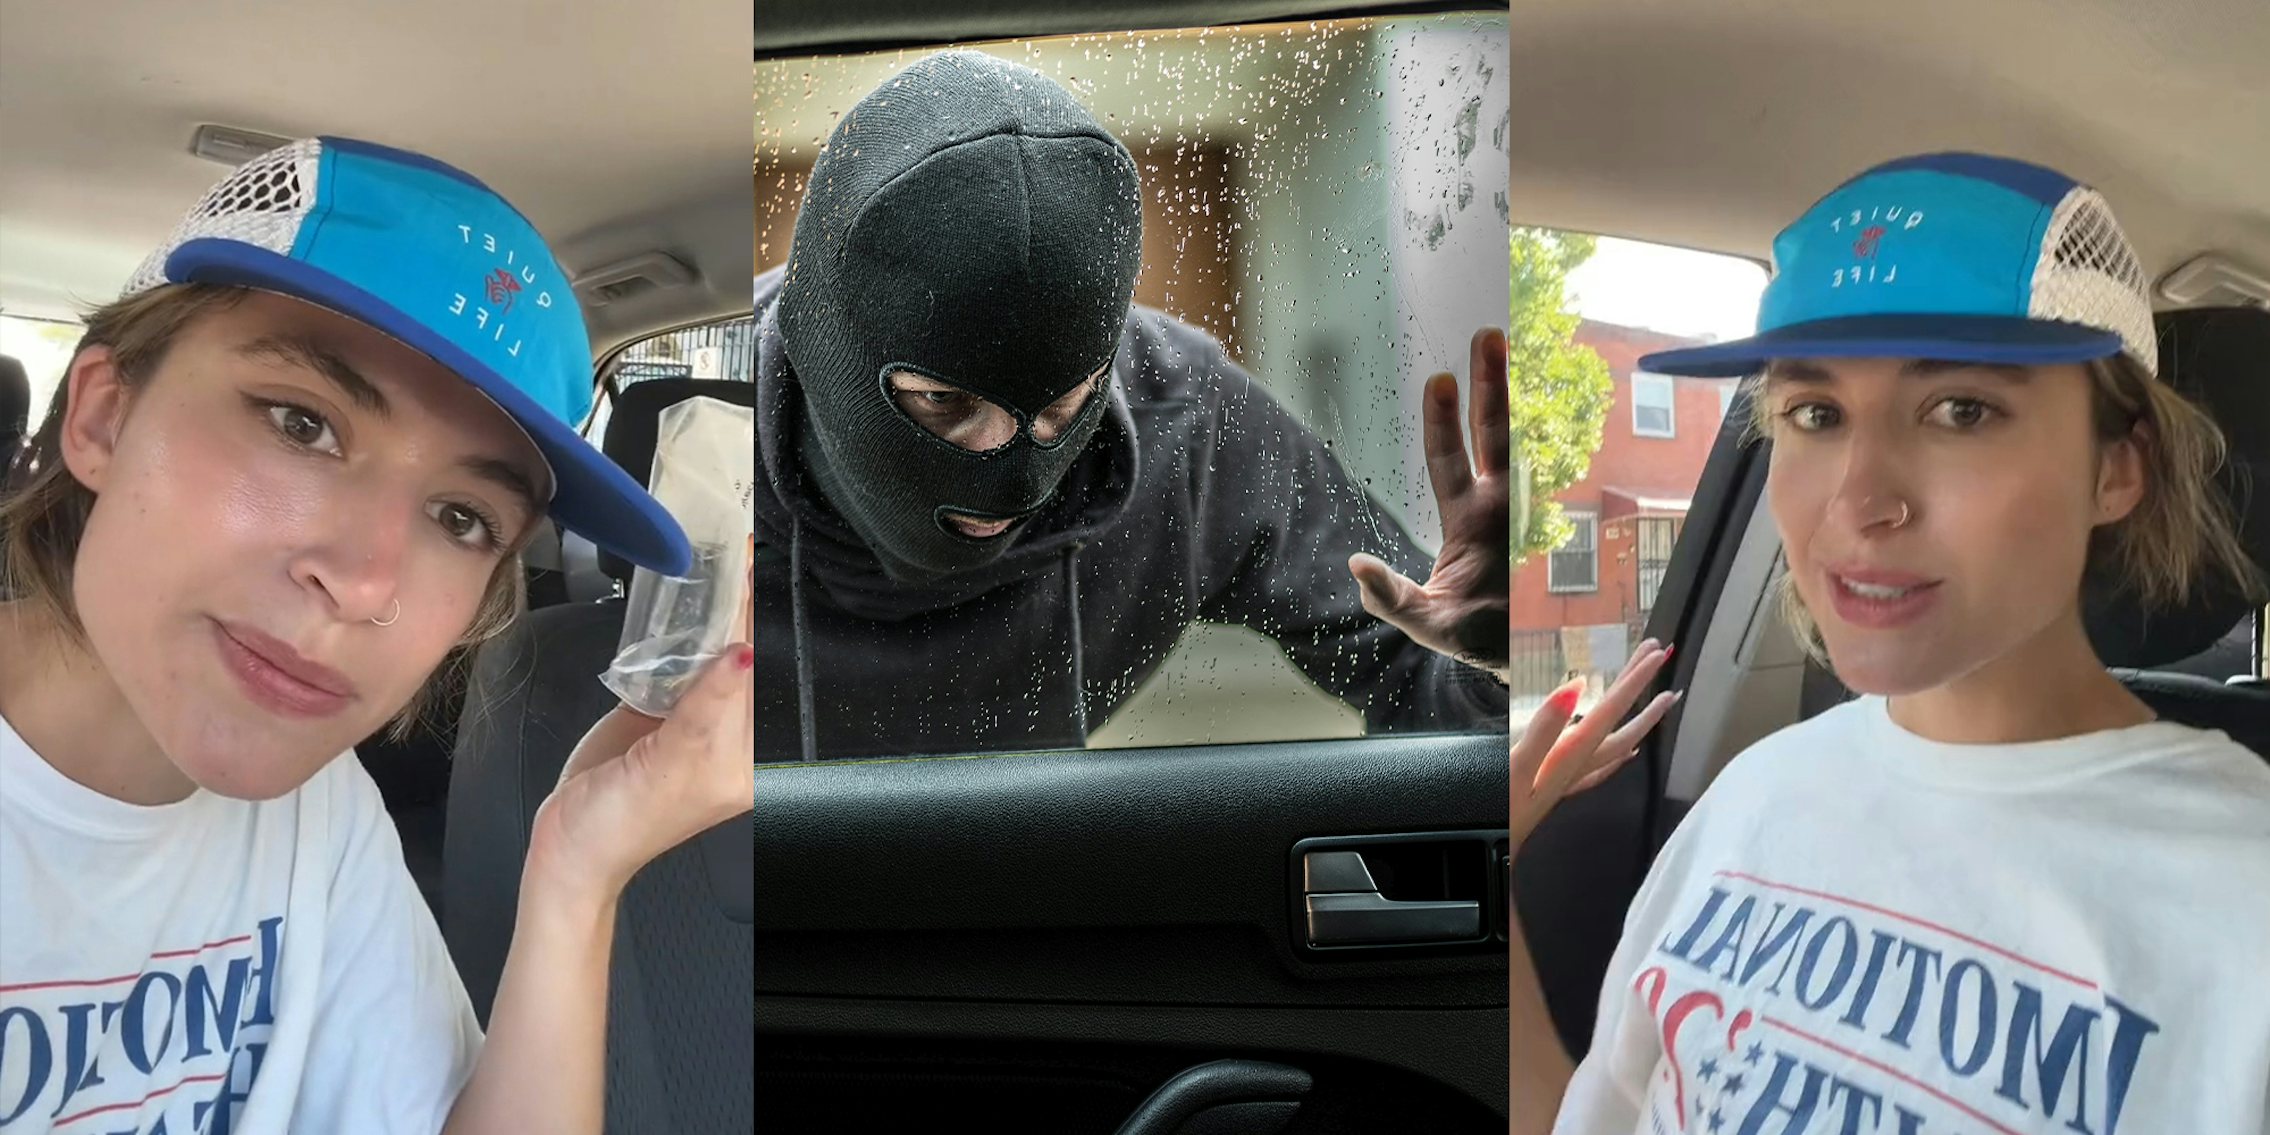 Woman wearing blue hat and white shirt inside of car; Man dressed in black with a balaclava on his head looking through car window and wondering how to break into this car.